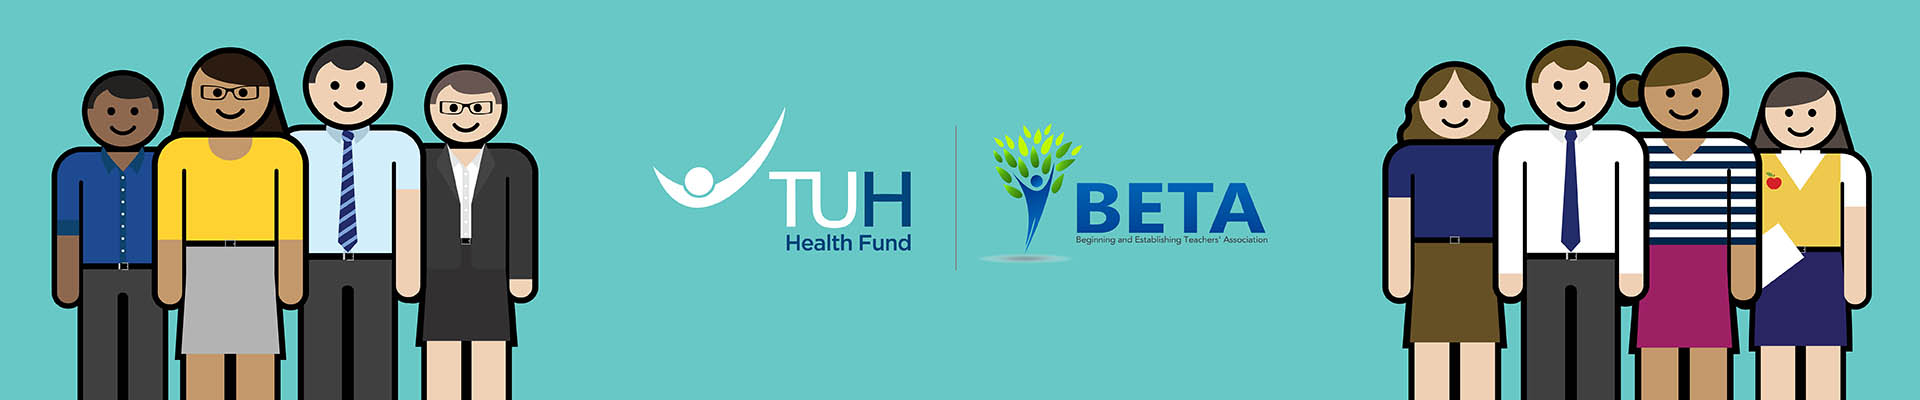 TUH health fund and BETA logo banner